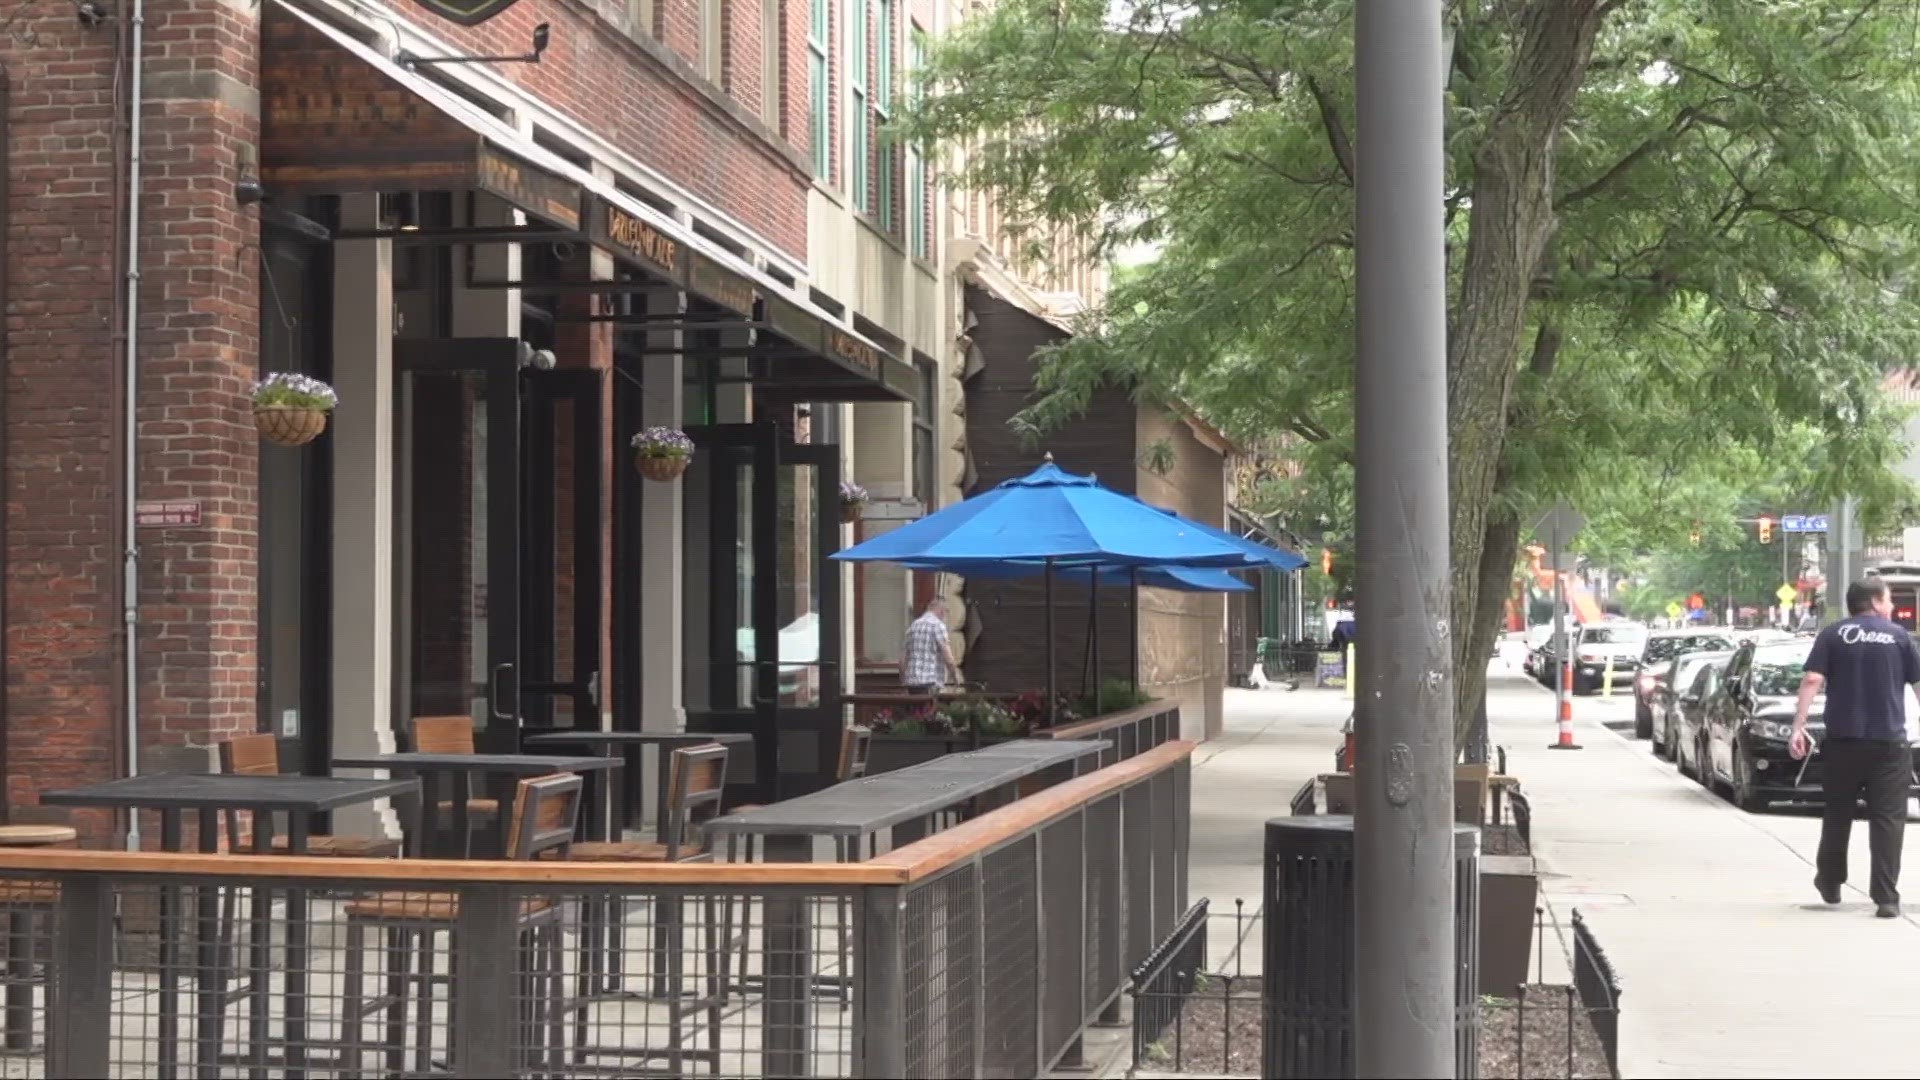 West 6th Street is back open for business this weekend, but concerns remain.